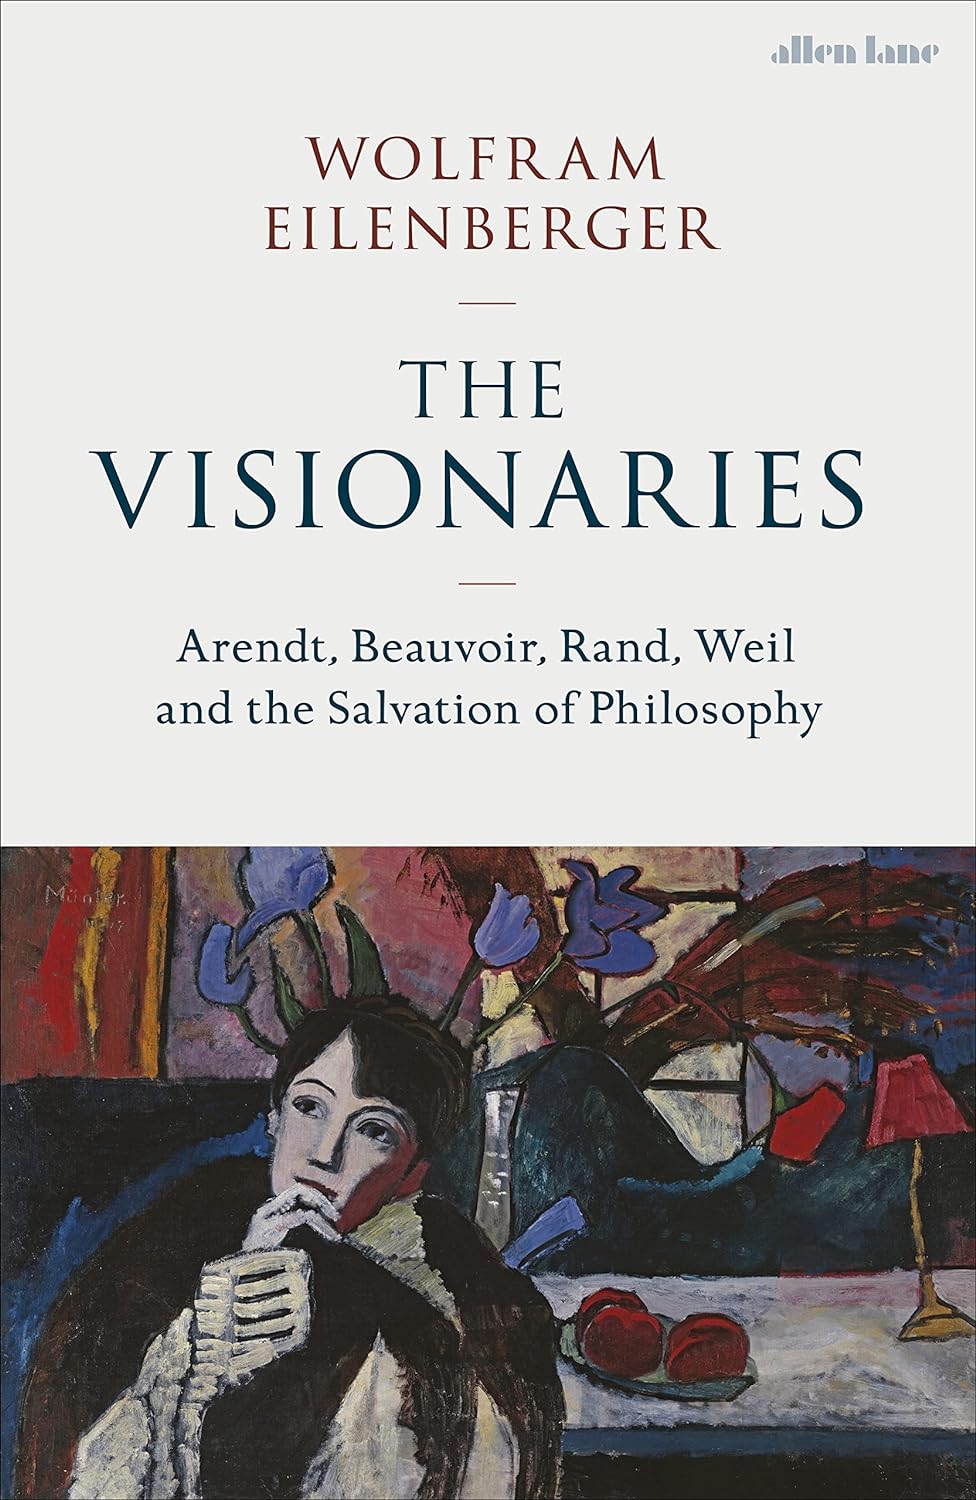 The Visionaries: Arendt, Beauvoir, Rand, Weil and the salvation of philosophy